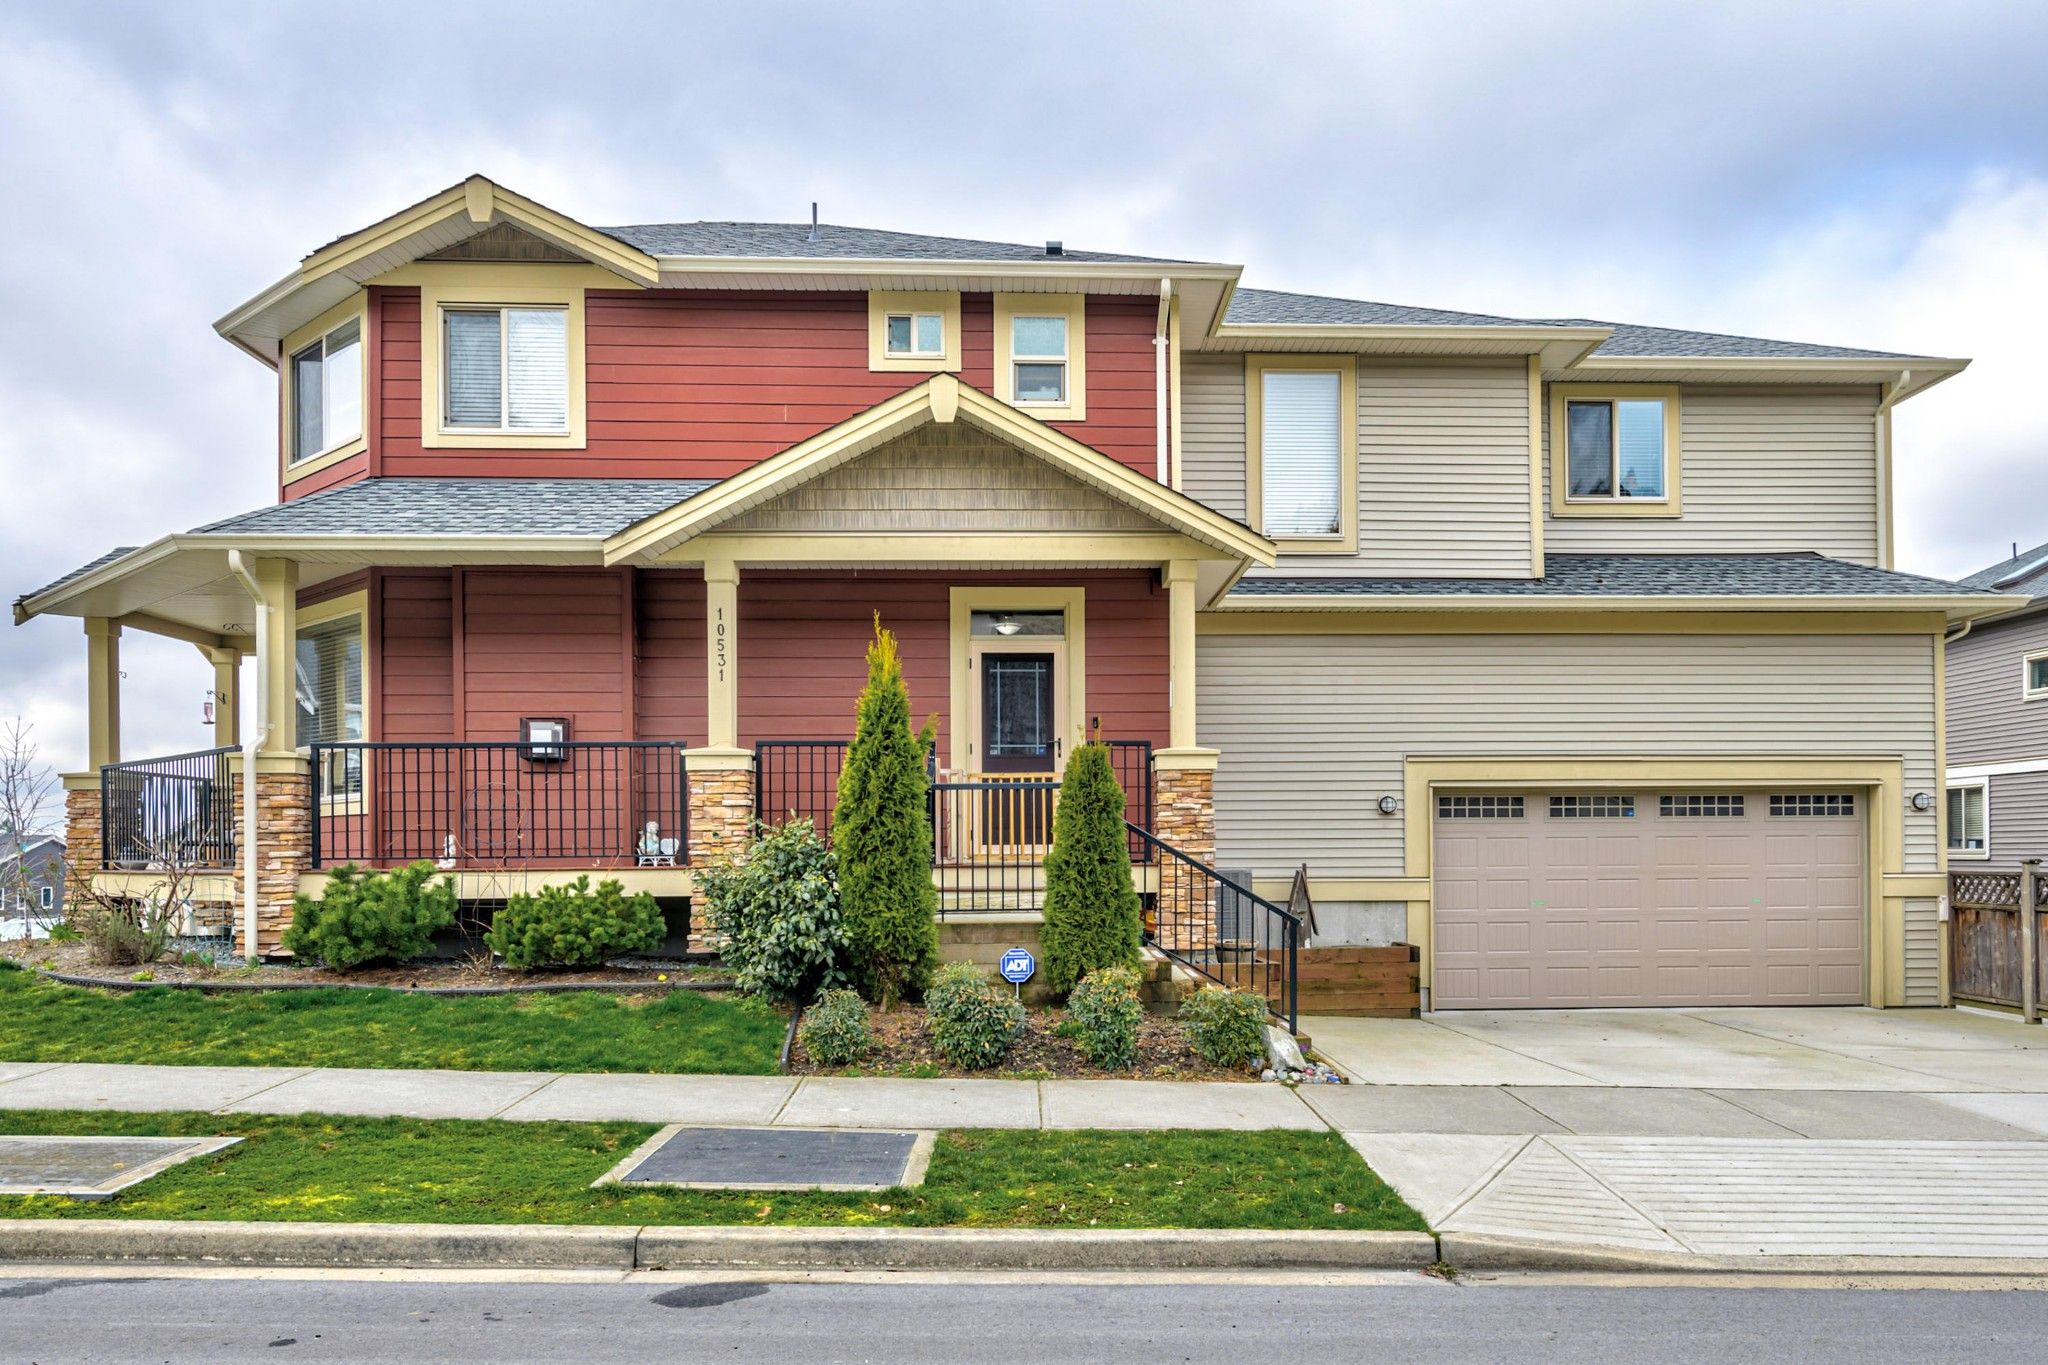 Main Photo: 10531 248 STREET in Maple Ridge: Albion House for sale : MLS®# R2549525